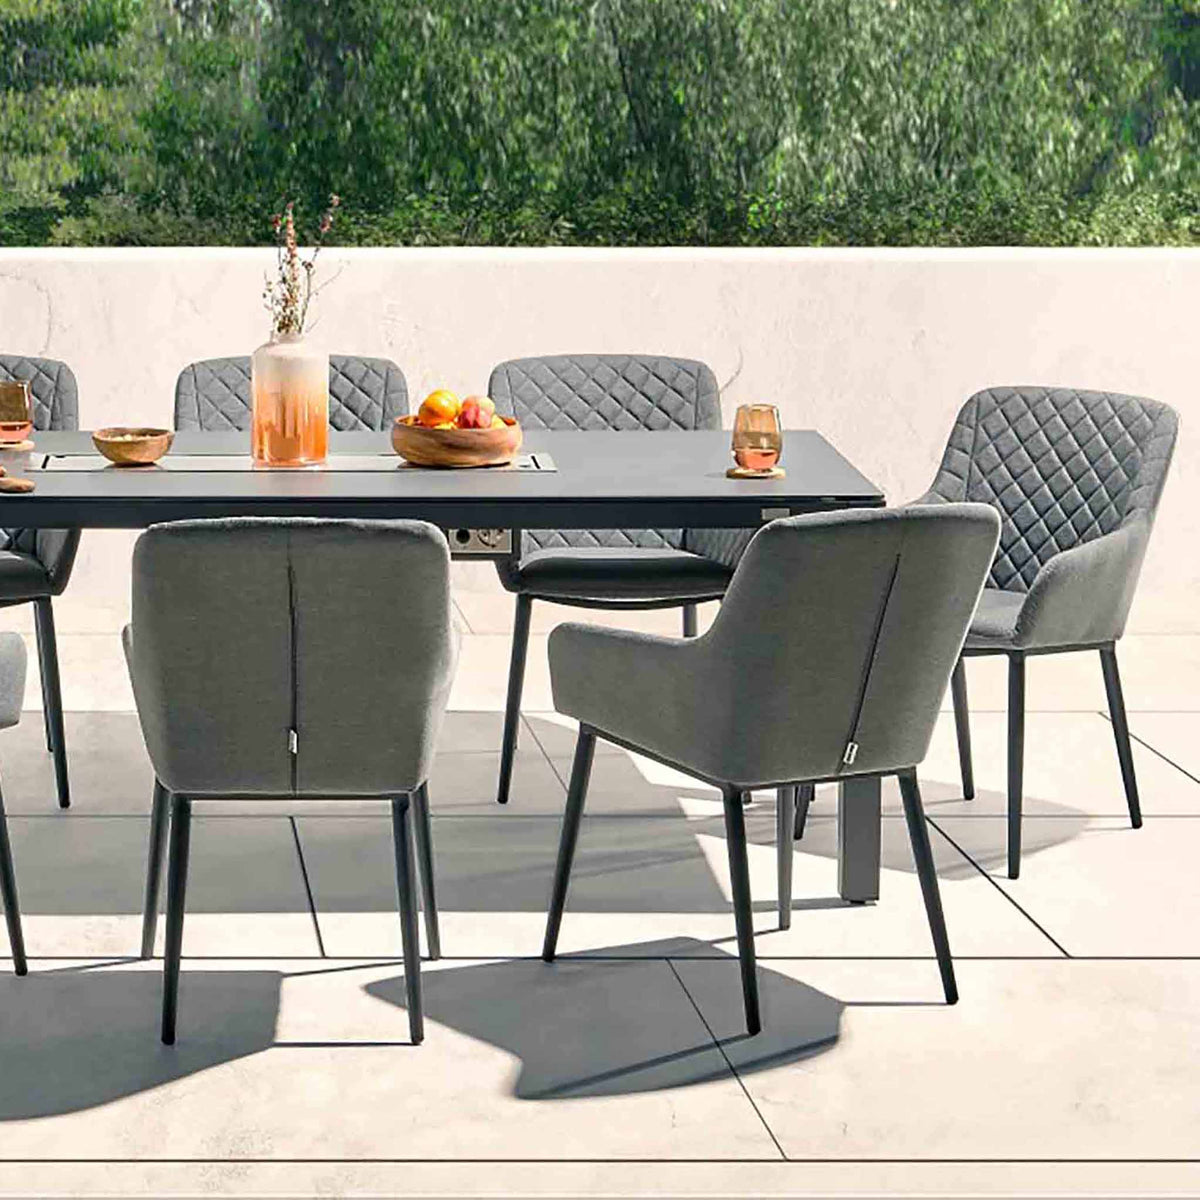 Sunbrella 8 Seatr Outdoor Garden Fire Pit BBQ Dining Set with Dining Chairs